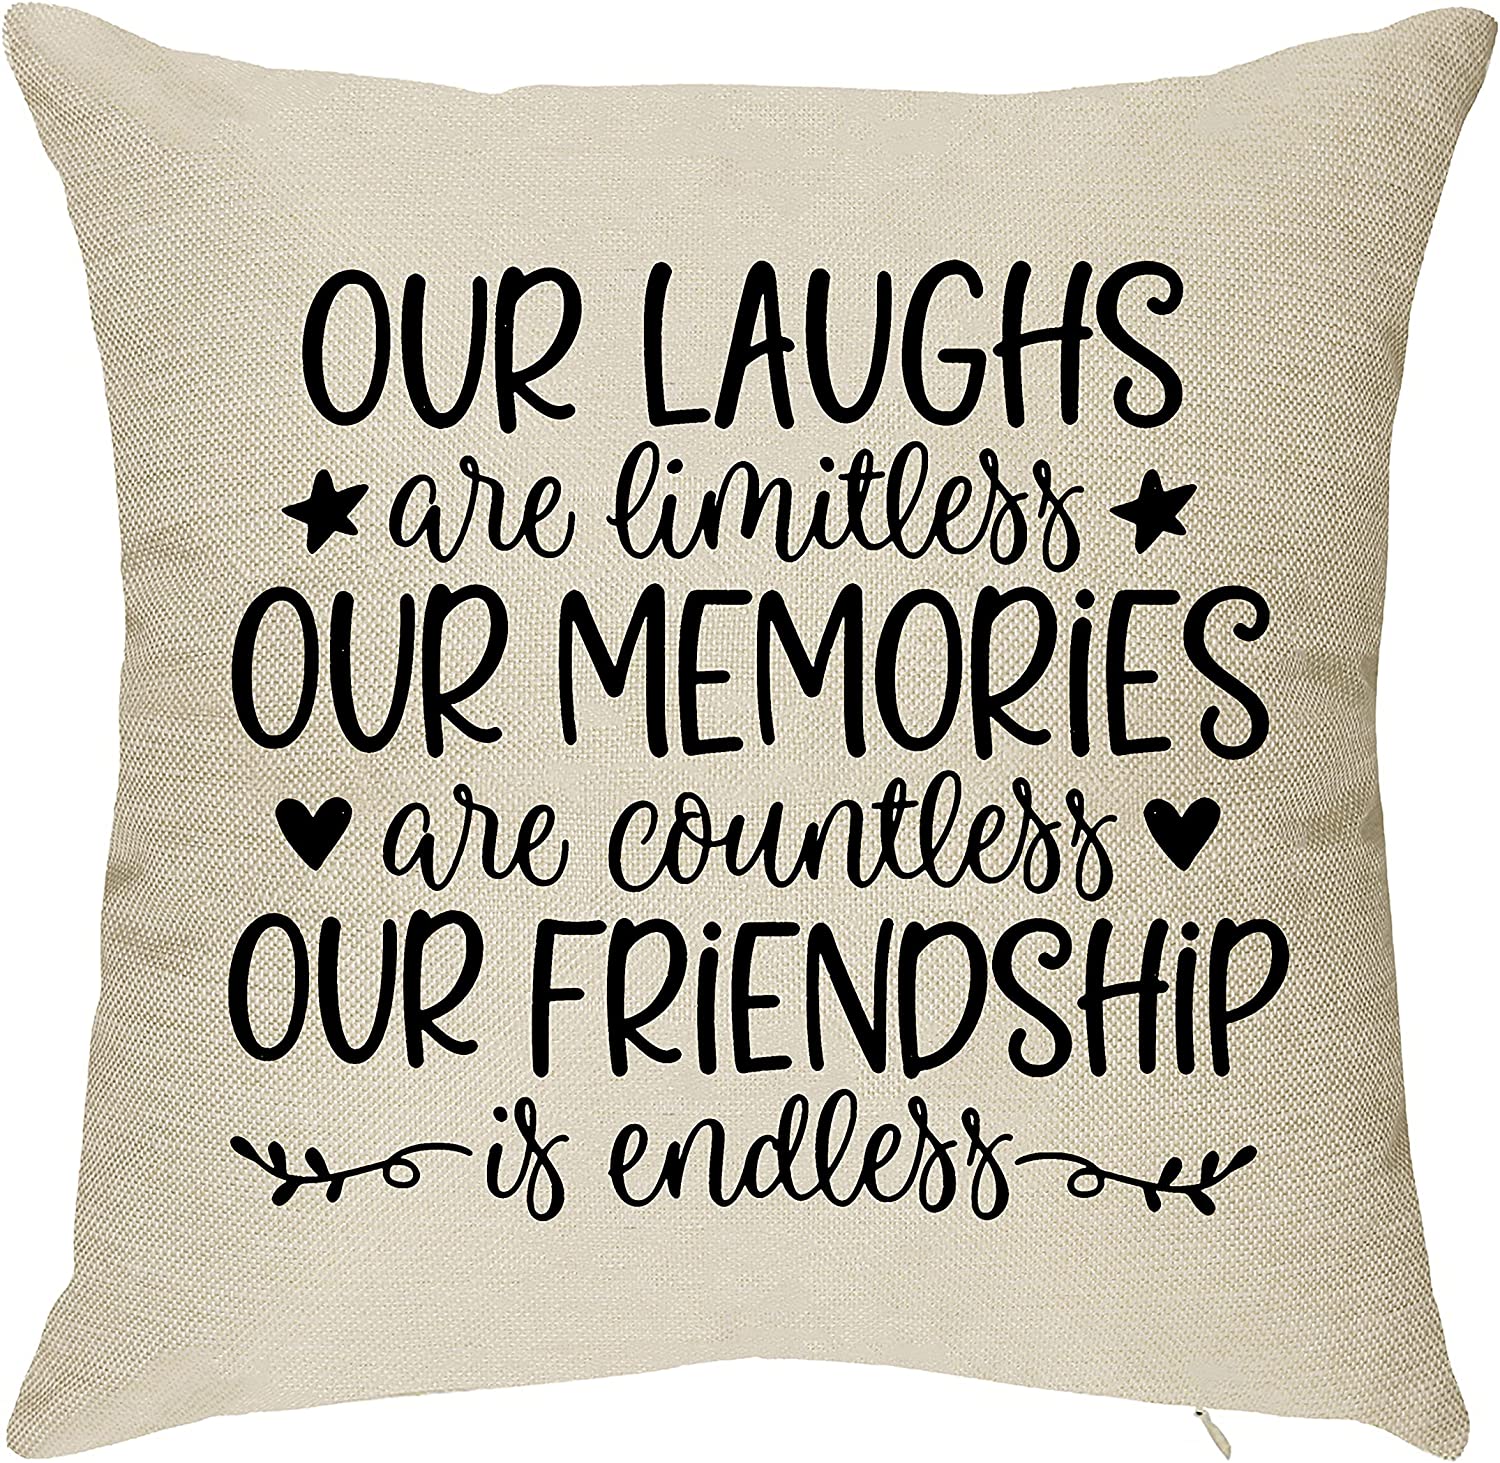 Our Laughs Are Limitless, Our Memories Are Countless, Our Friendship Is Endless Pillow